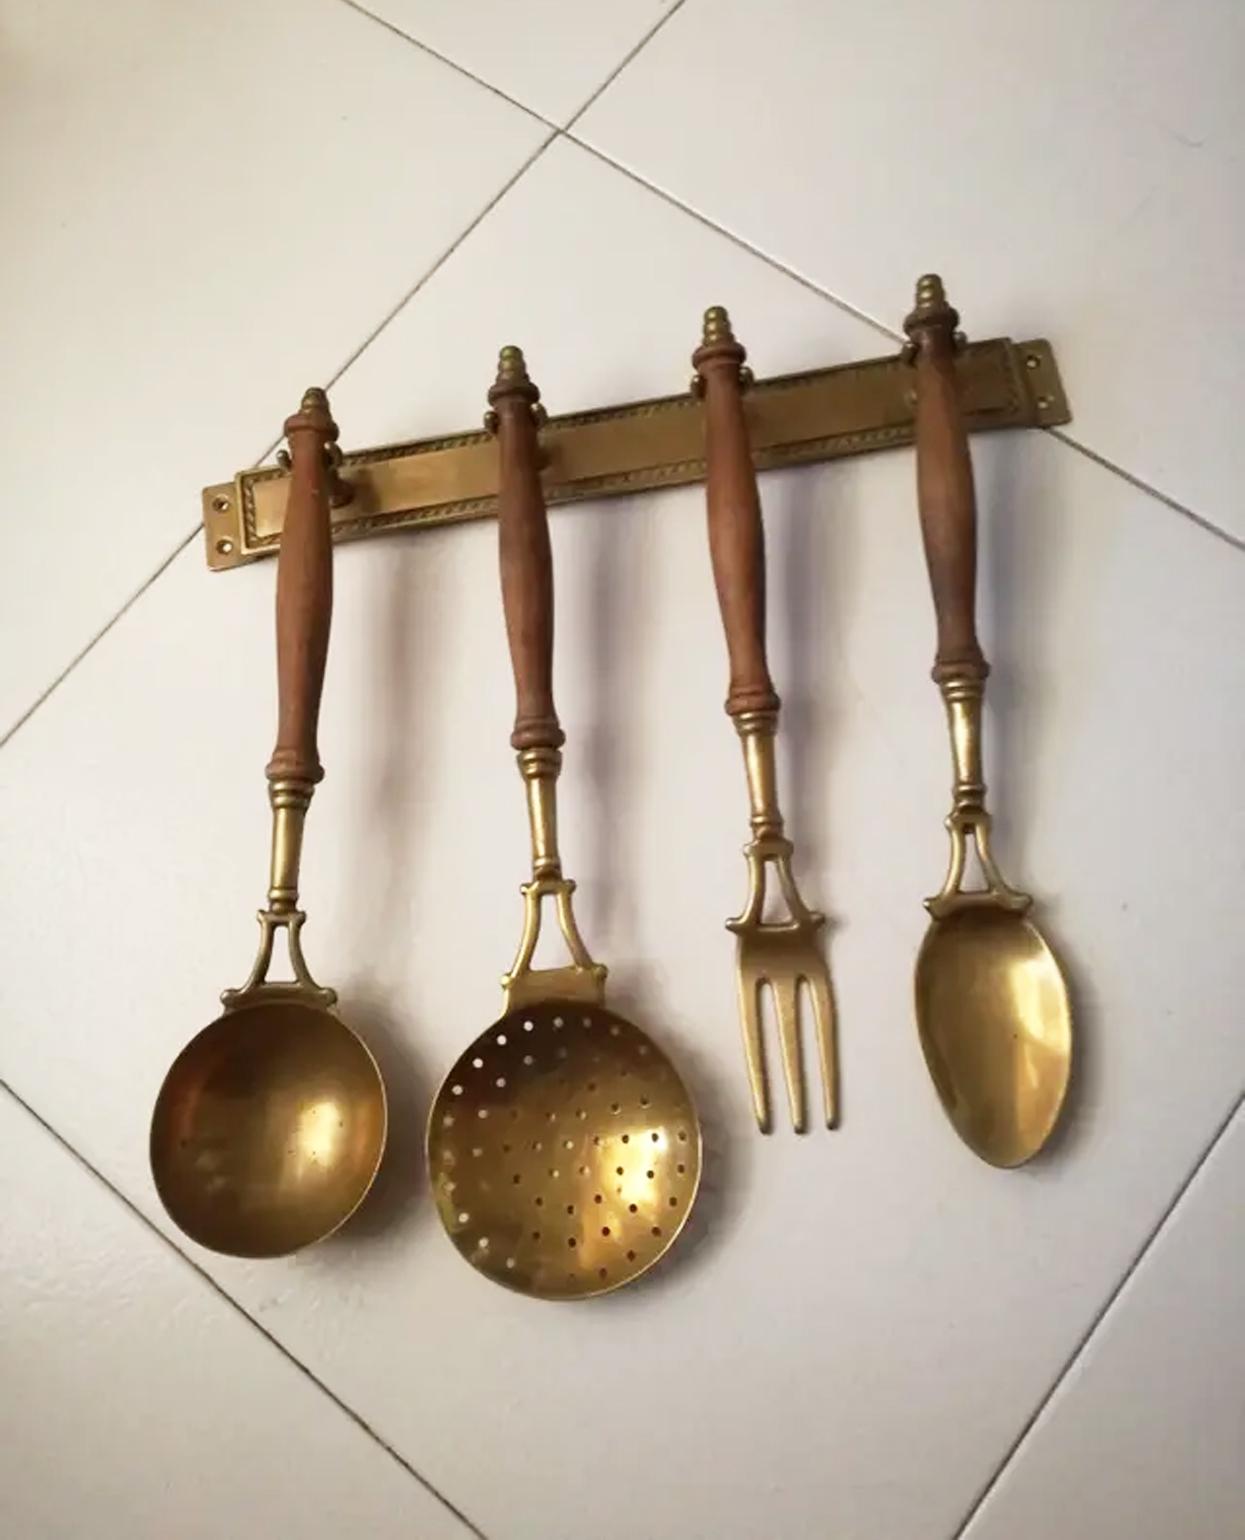 Spanish Old Kitchen Utensils Made of Brass with from a Hanging Bar, Early 20th Century